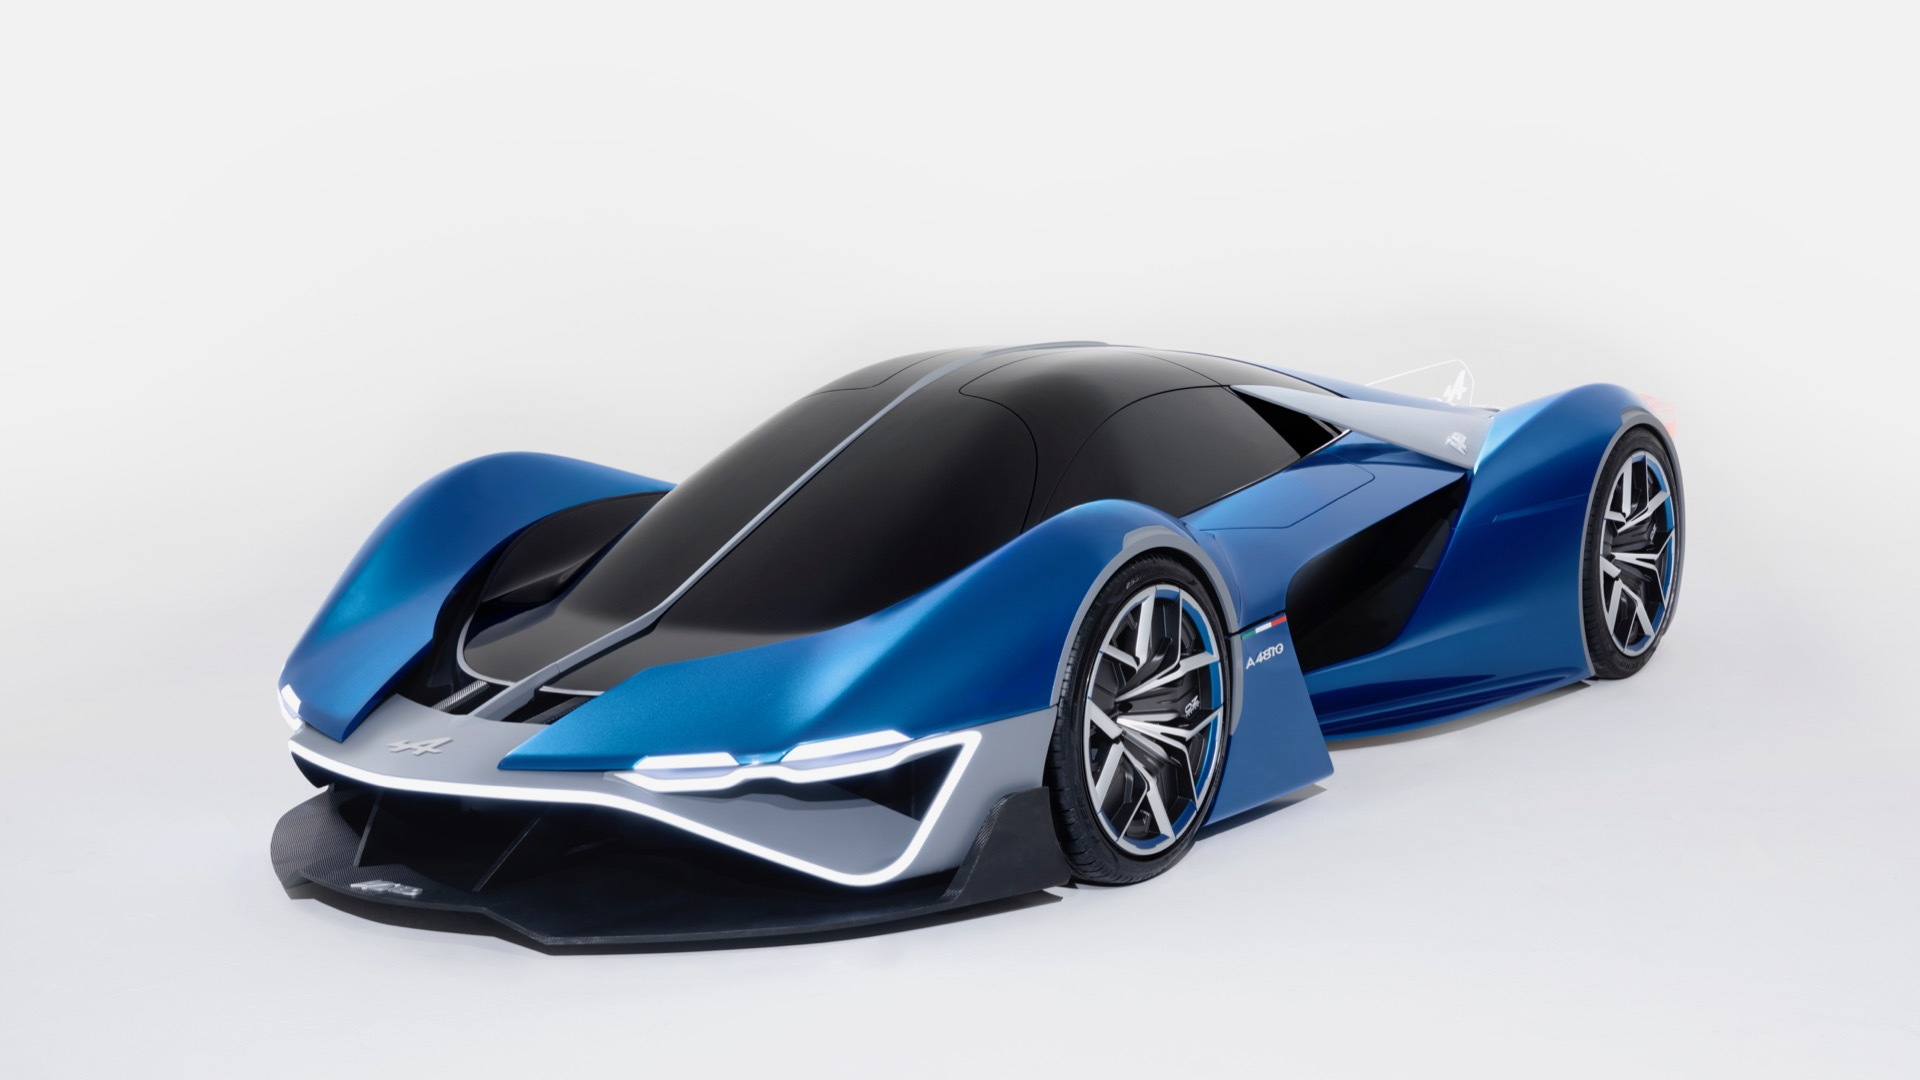 Alpine A4810 hypercar study by IED students